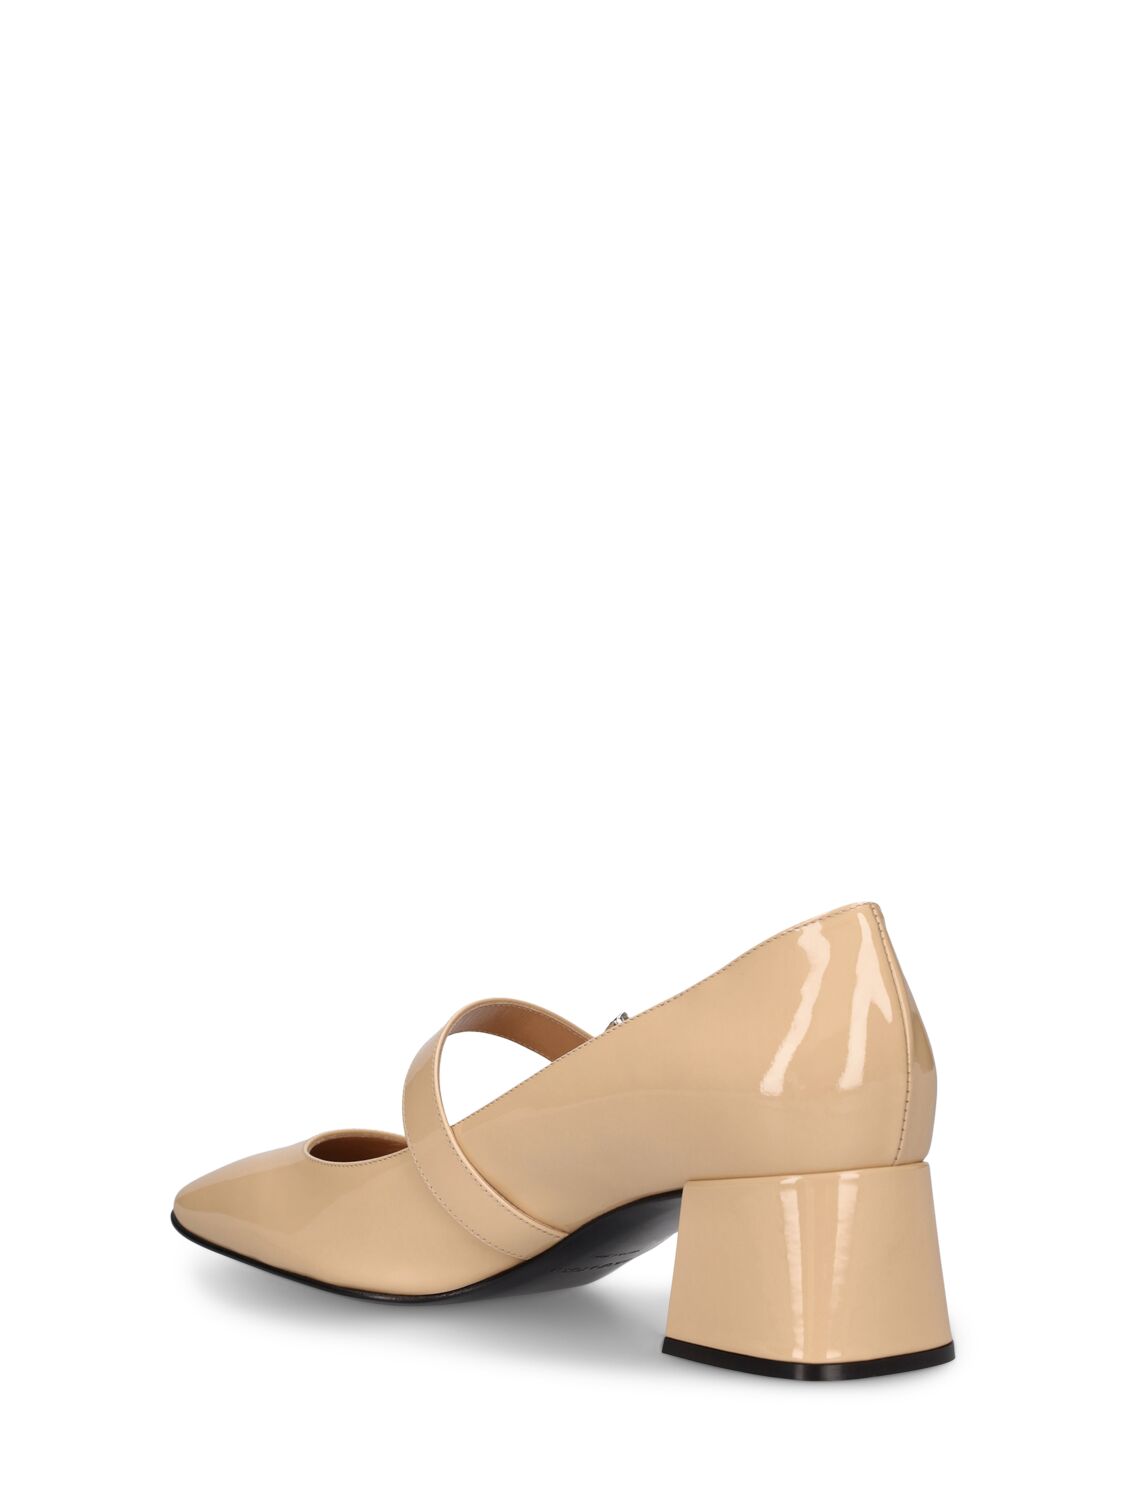 Shop Sergio Rossi 45mm Patent Leather Pumps In Nude